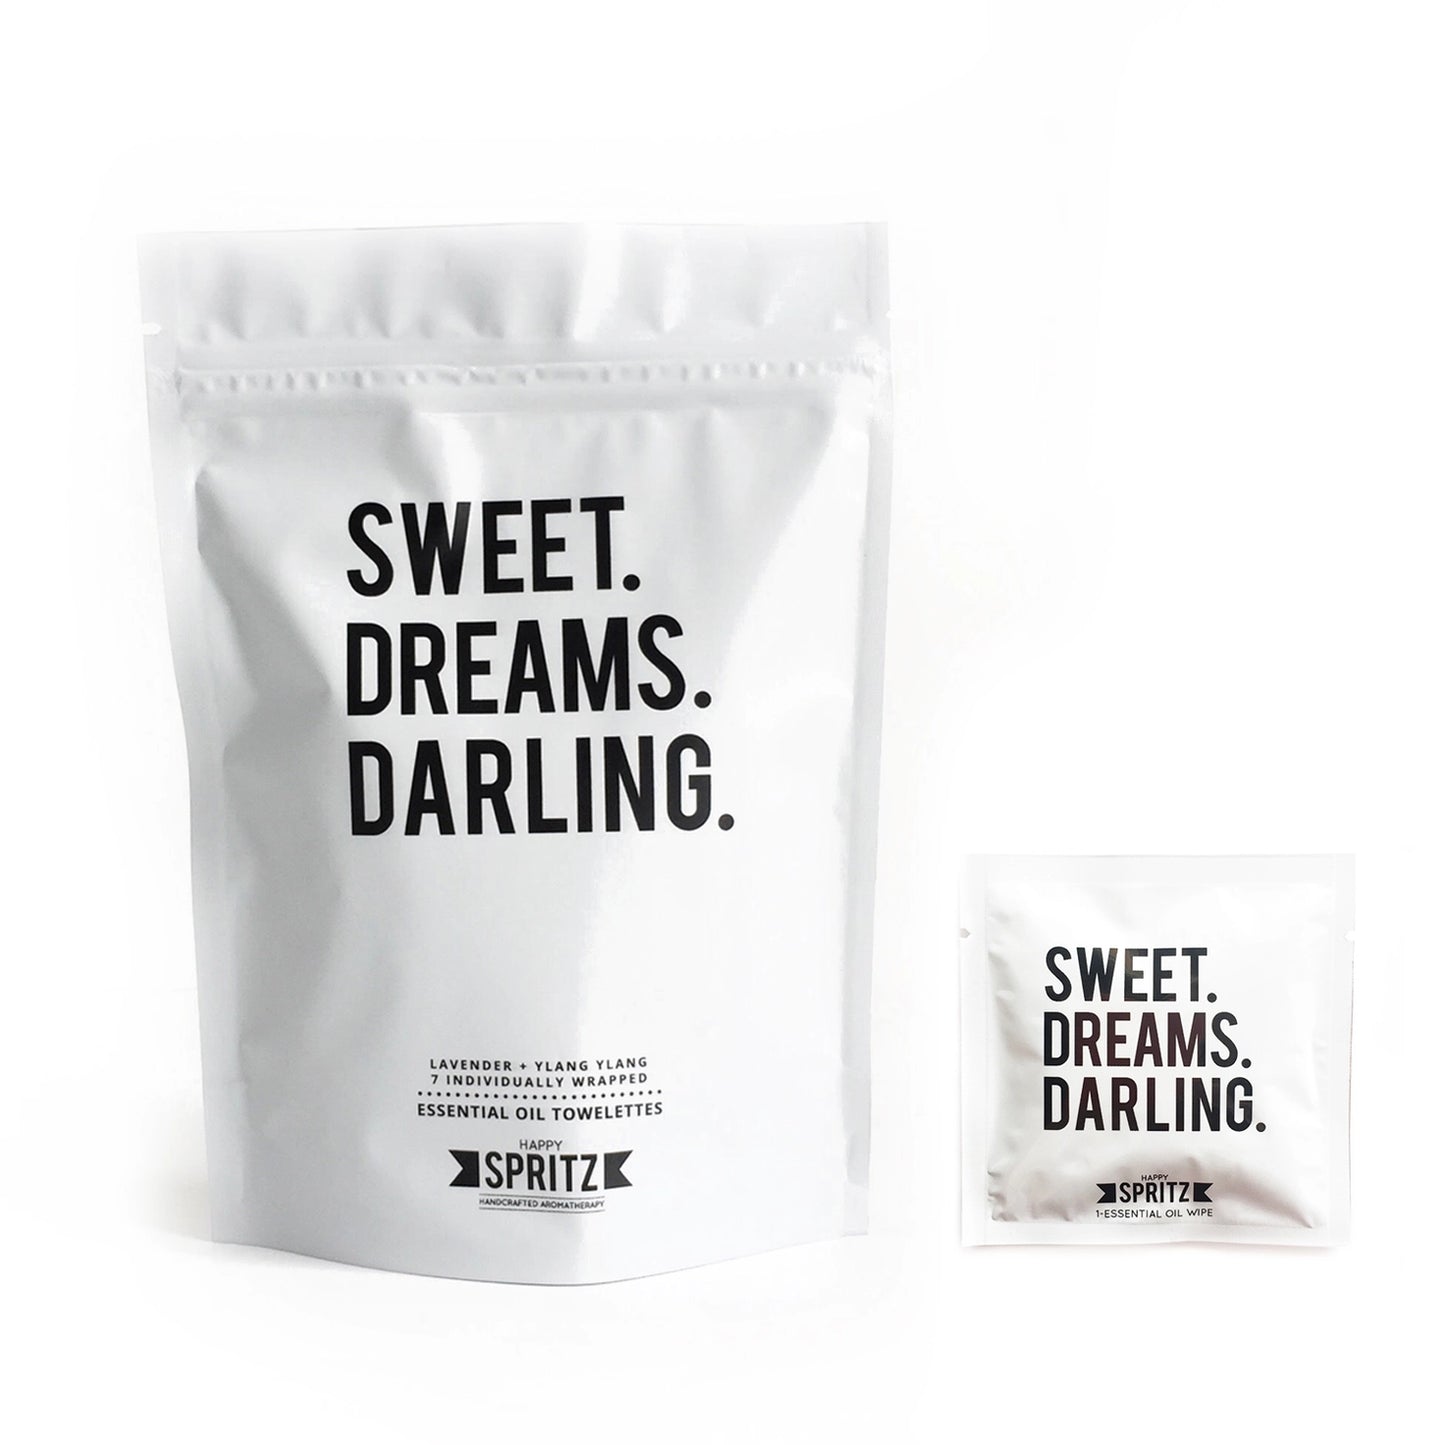 Sweet Dreams Darling Towelettes 7 Day Bag